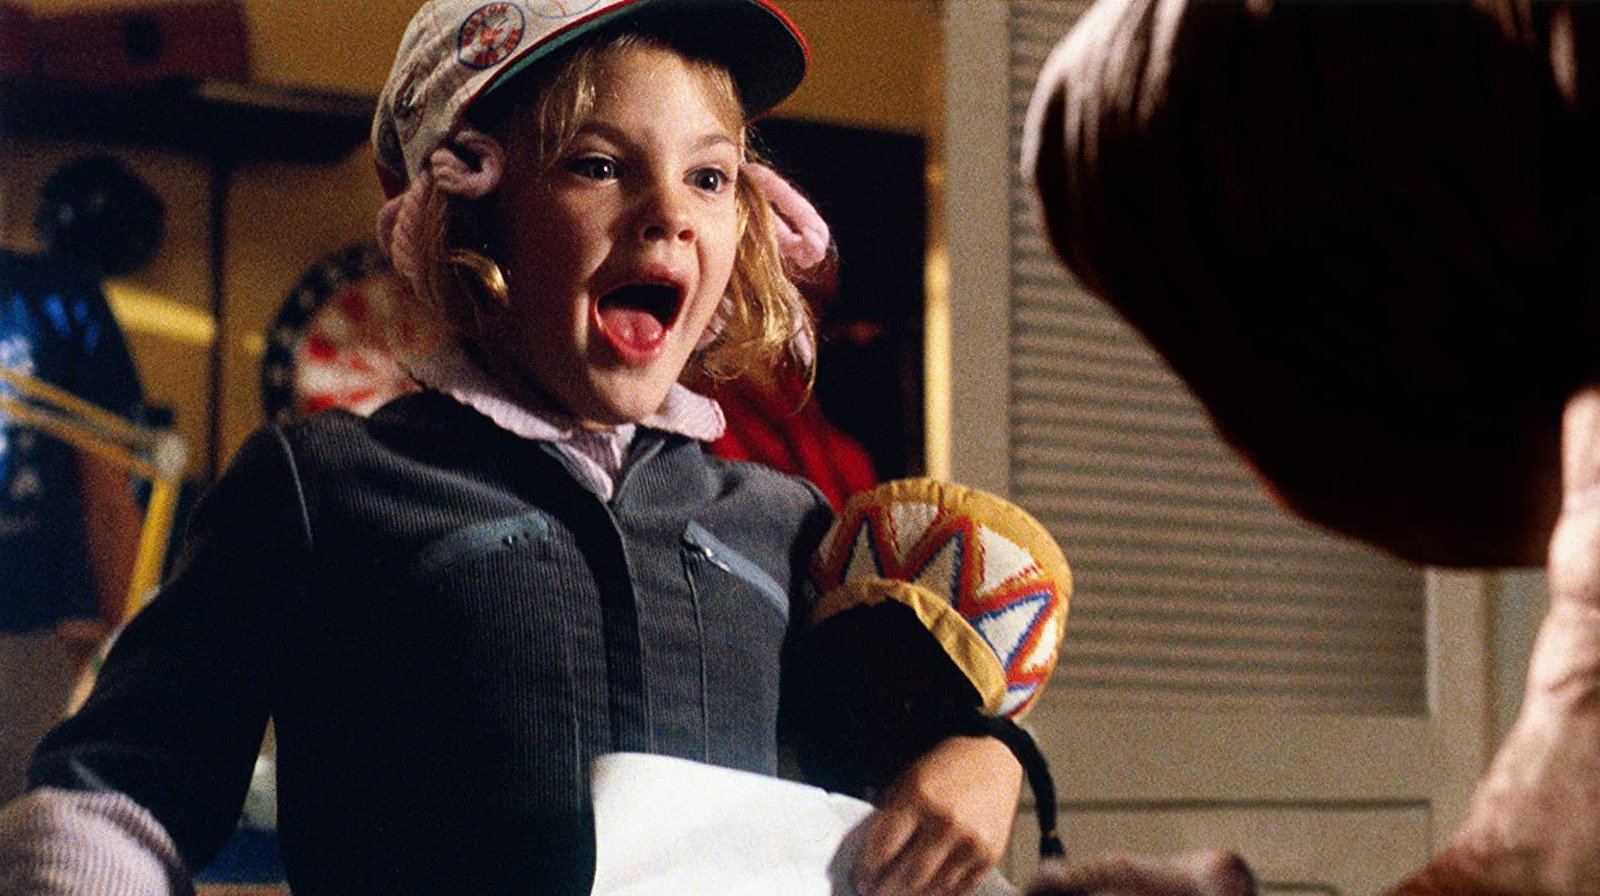 As A Child, Drew Barrymore Thought E.T. Was Real, And Steven Spielberg Kept It That Way